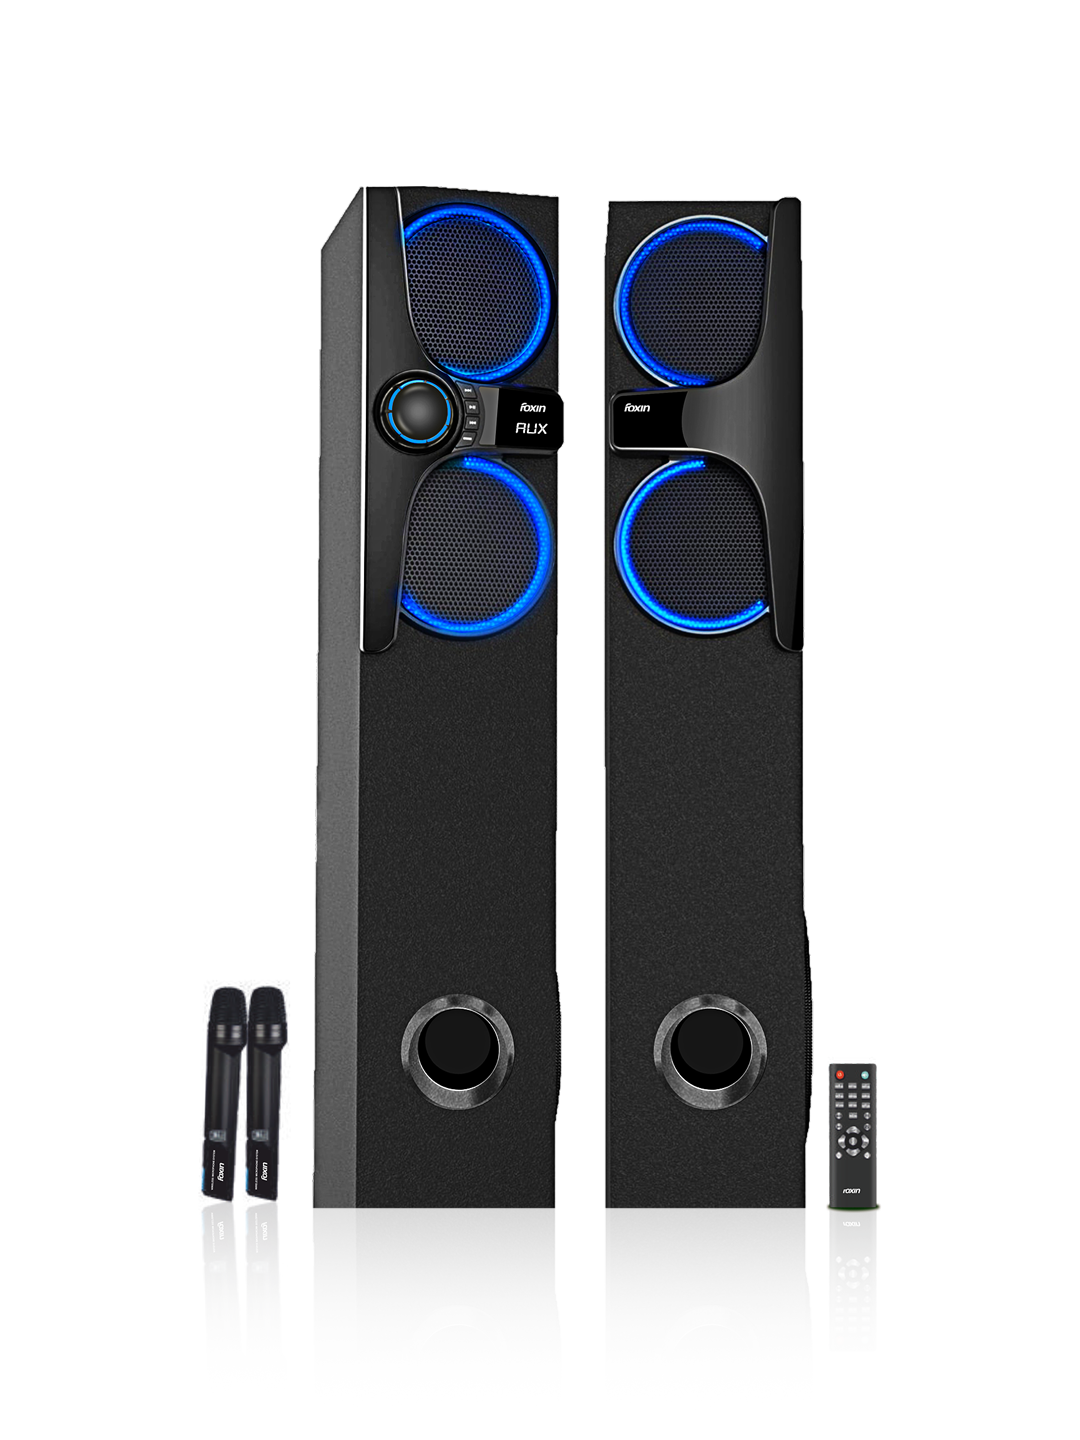 Foxin FMST-14800 DYNAMITE Dual Tower Speakers 120 Watt /home theatre speaker/music system for home/party speakers